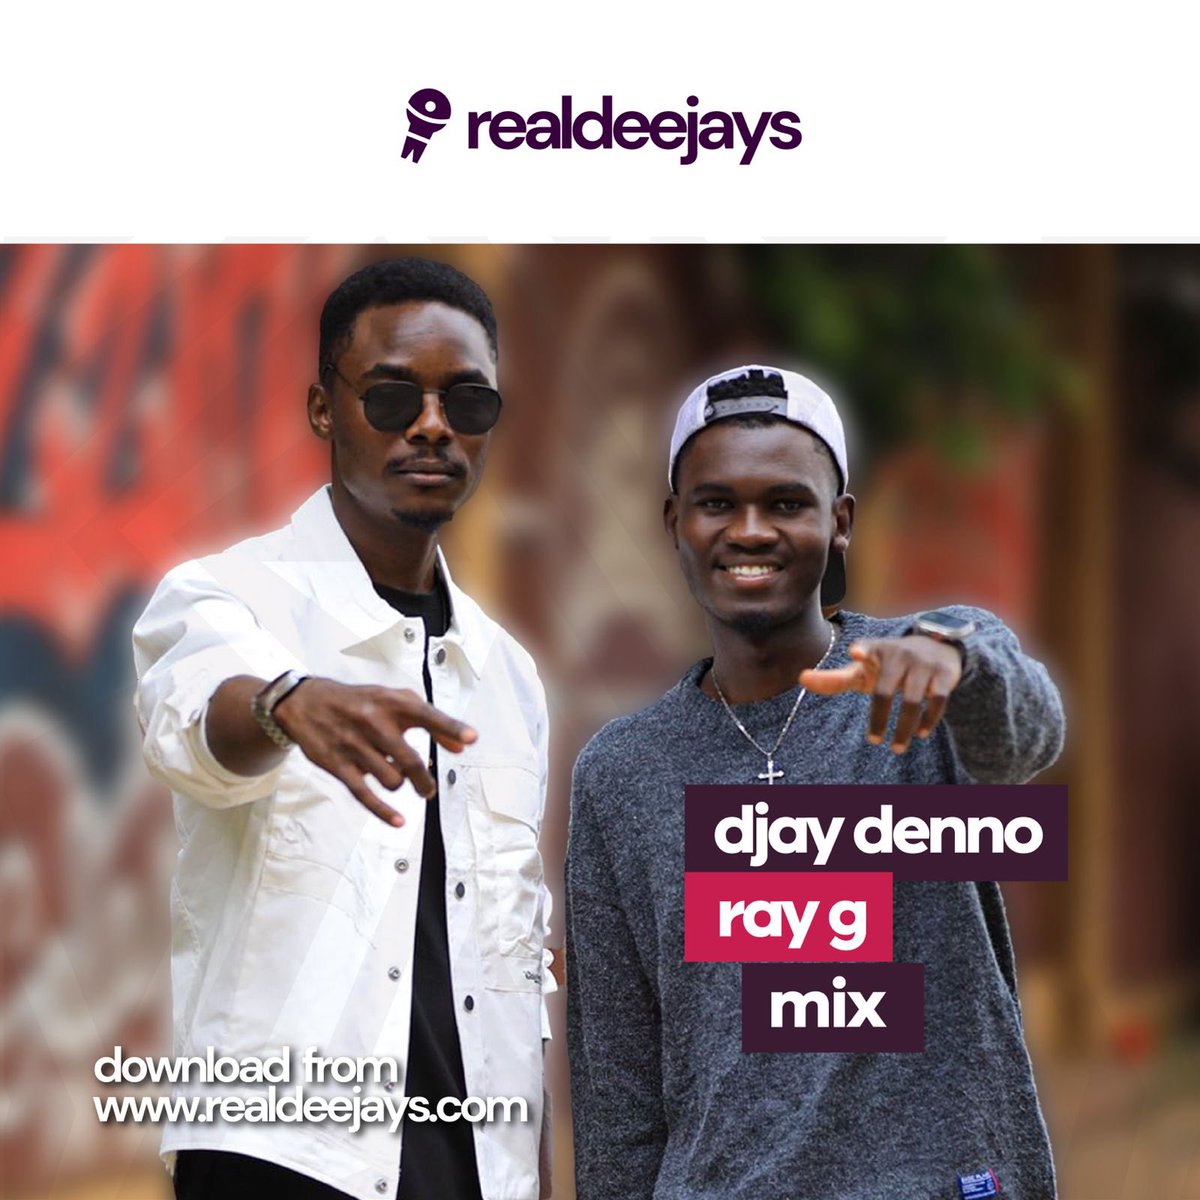 Ray G fans muliwa? 🙋🏾‍♀️🙋🏽‍♂️ @djaydenno cooked something yummy for you. Grab your headsets, sit back and enjoy hits from the son of the land 😉 @1rayg Miss this mix at your own risk💃🏽💃🏽💃🏽 Get it via realdeejays.com/station/ray-g-…